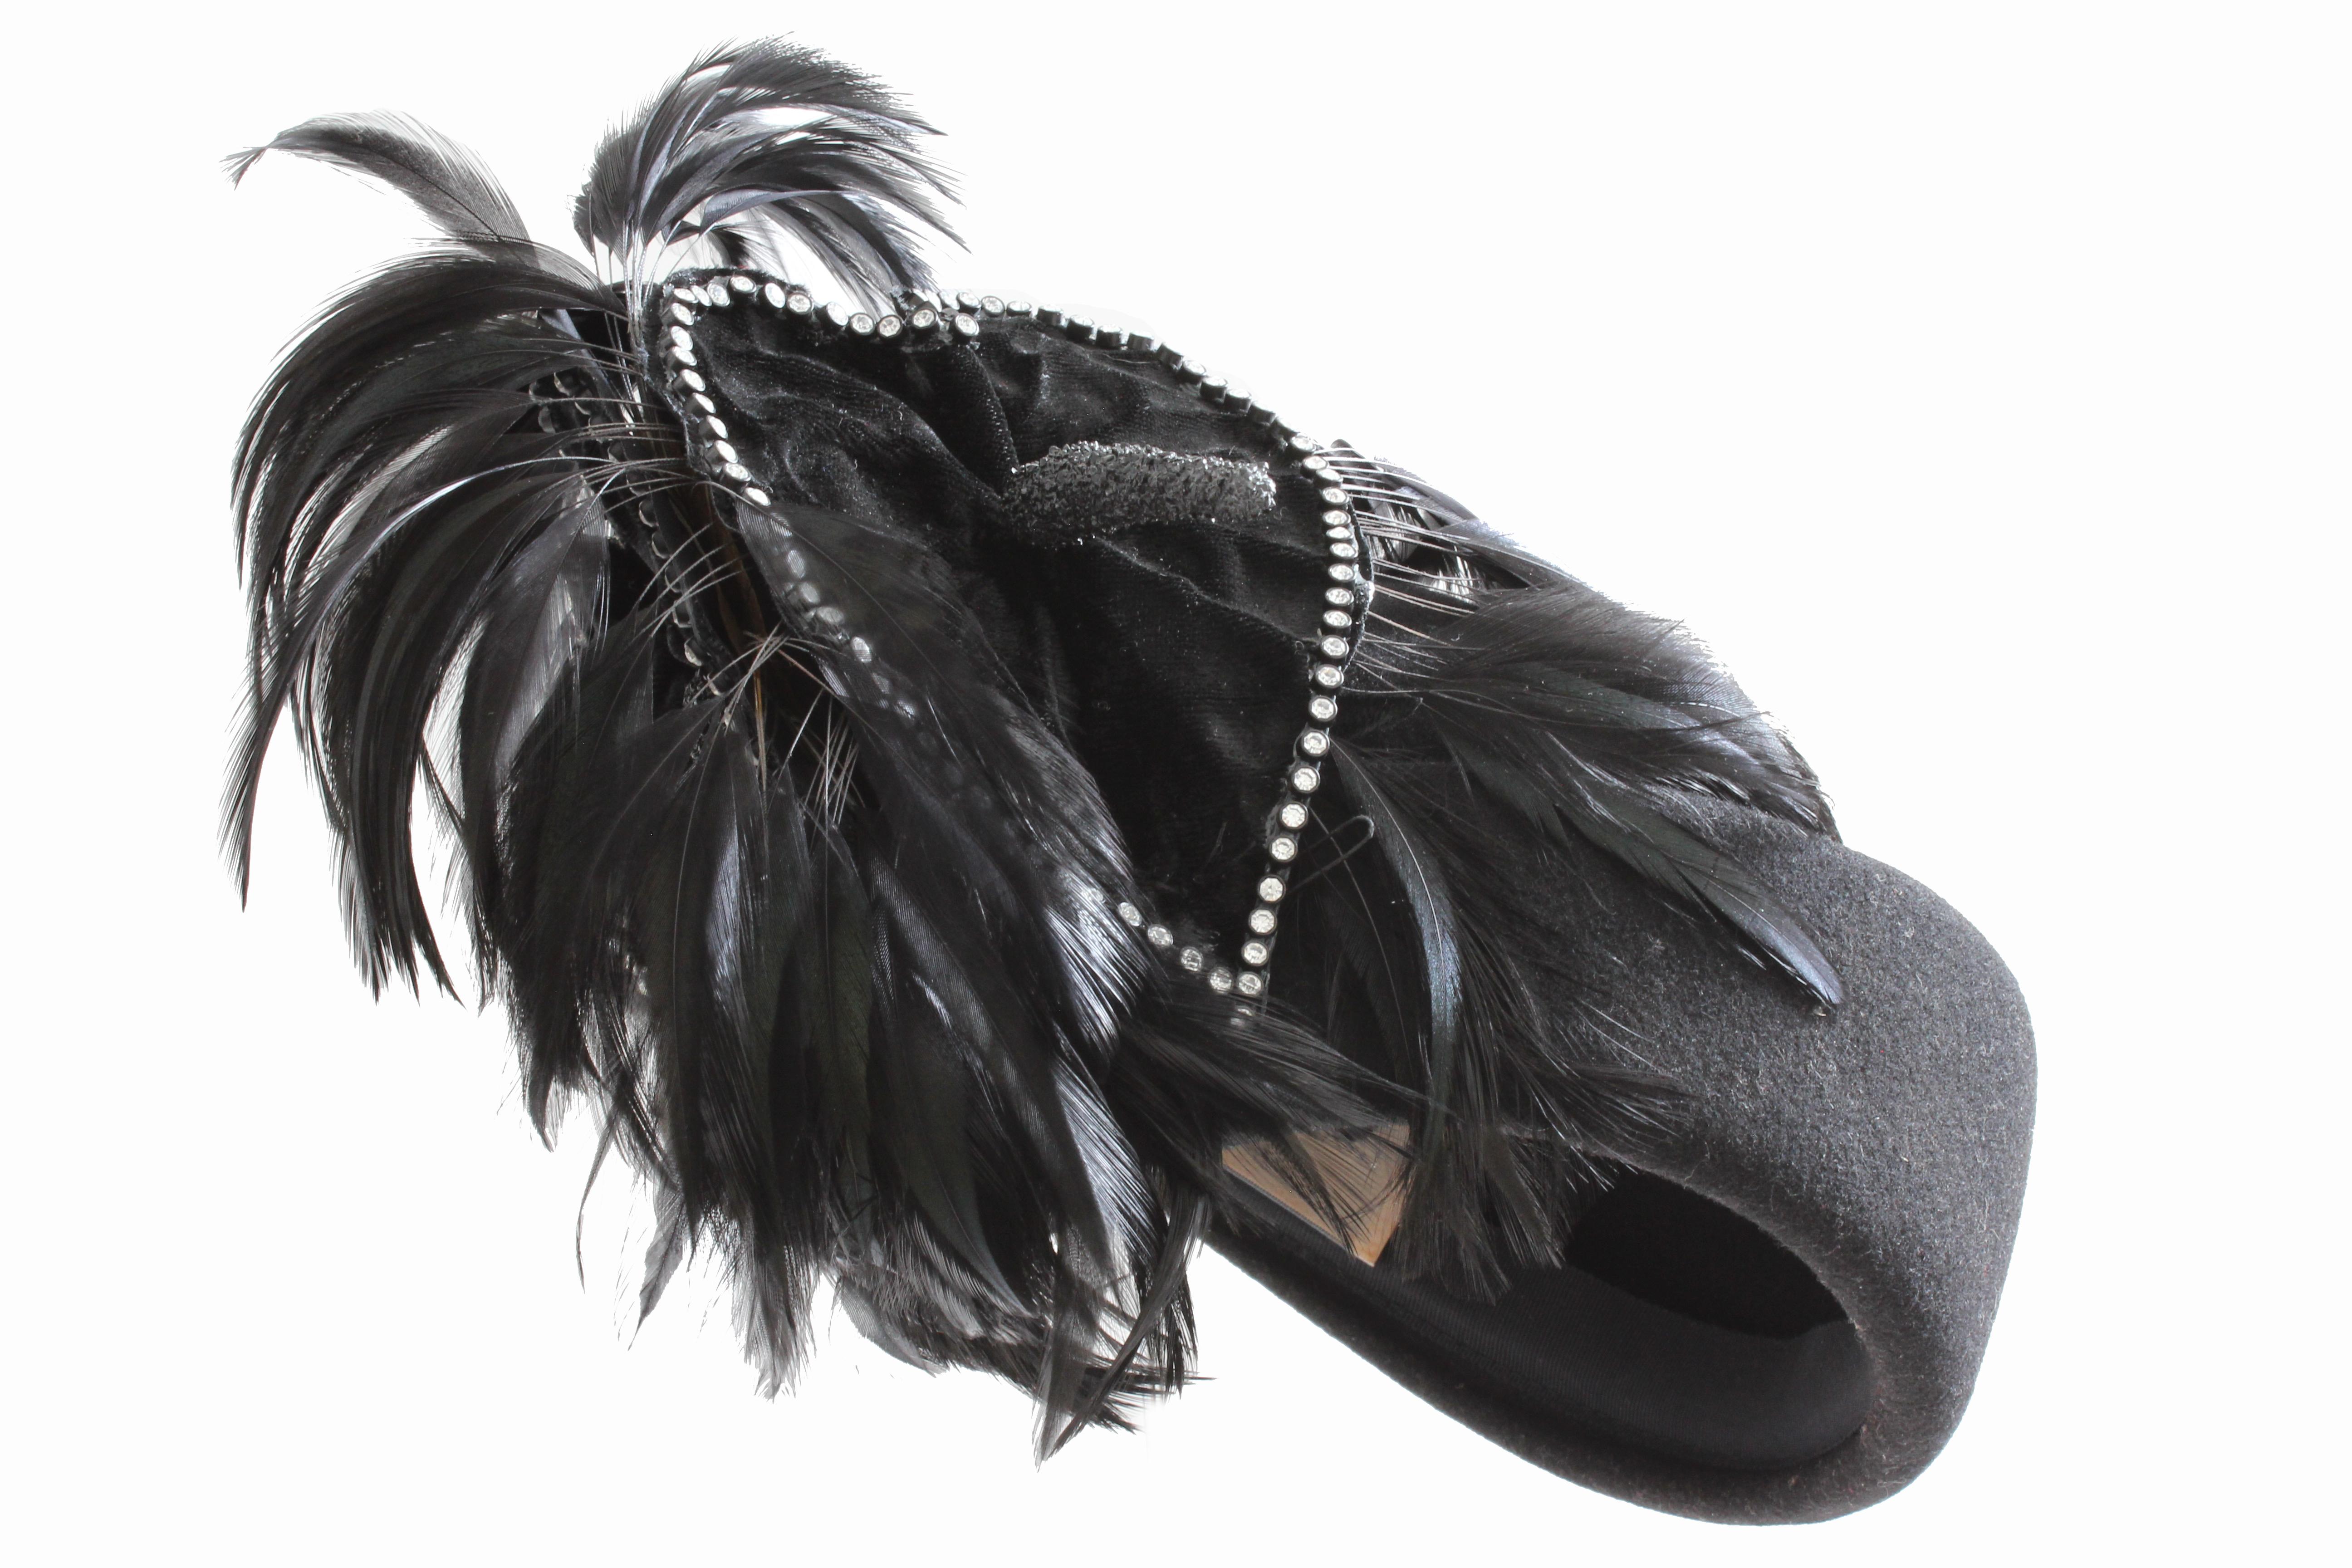 Jack McConnell Boutique Black Wool Clochette Hat with Feathers 1960s Bollman Hat In Good Condition For Sale In Port Saint Lucie, FL